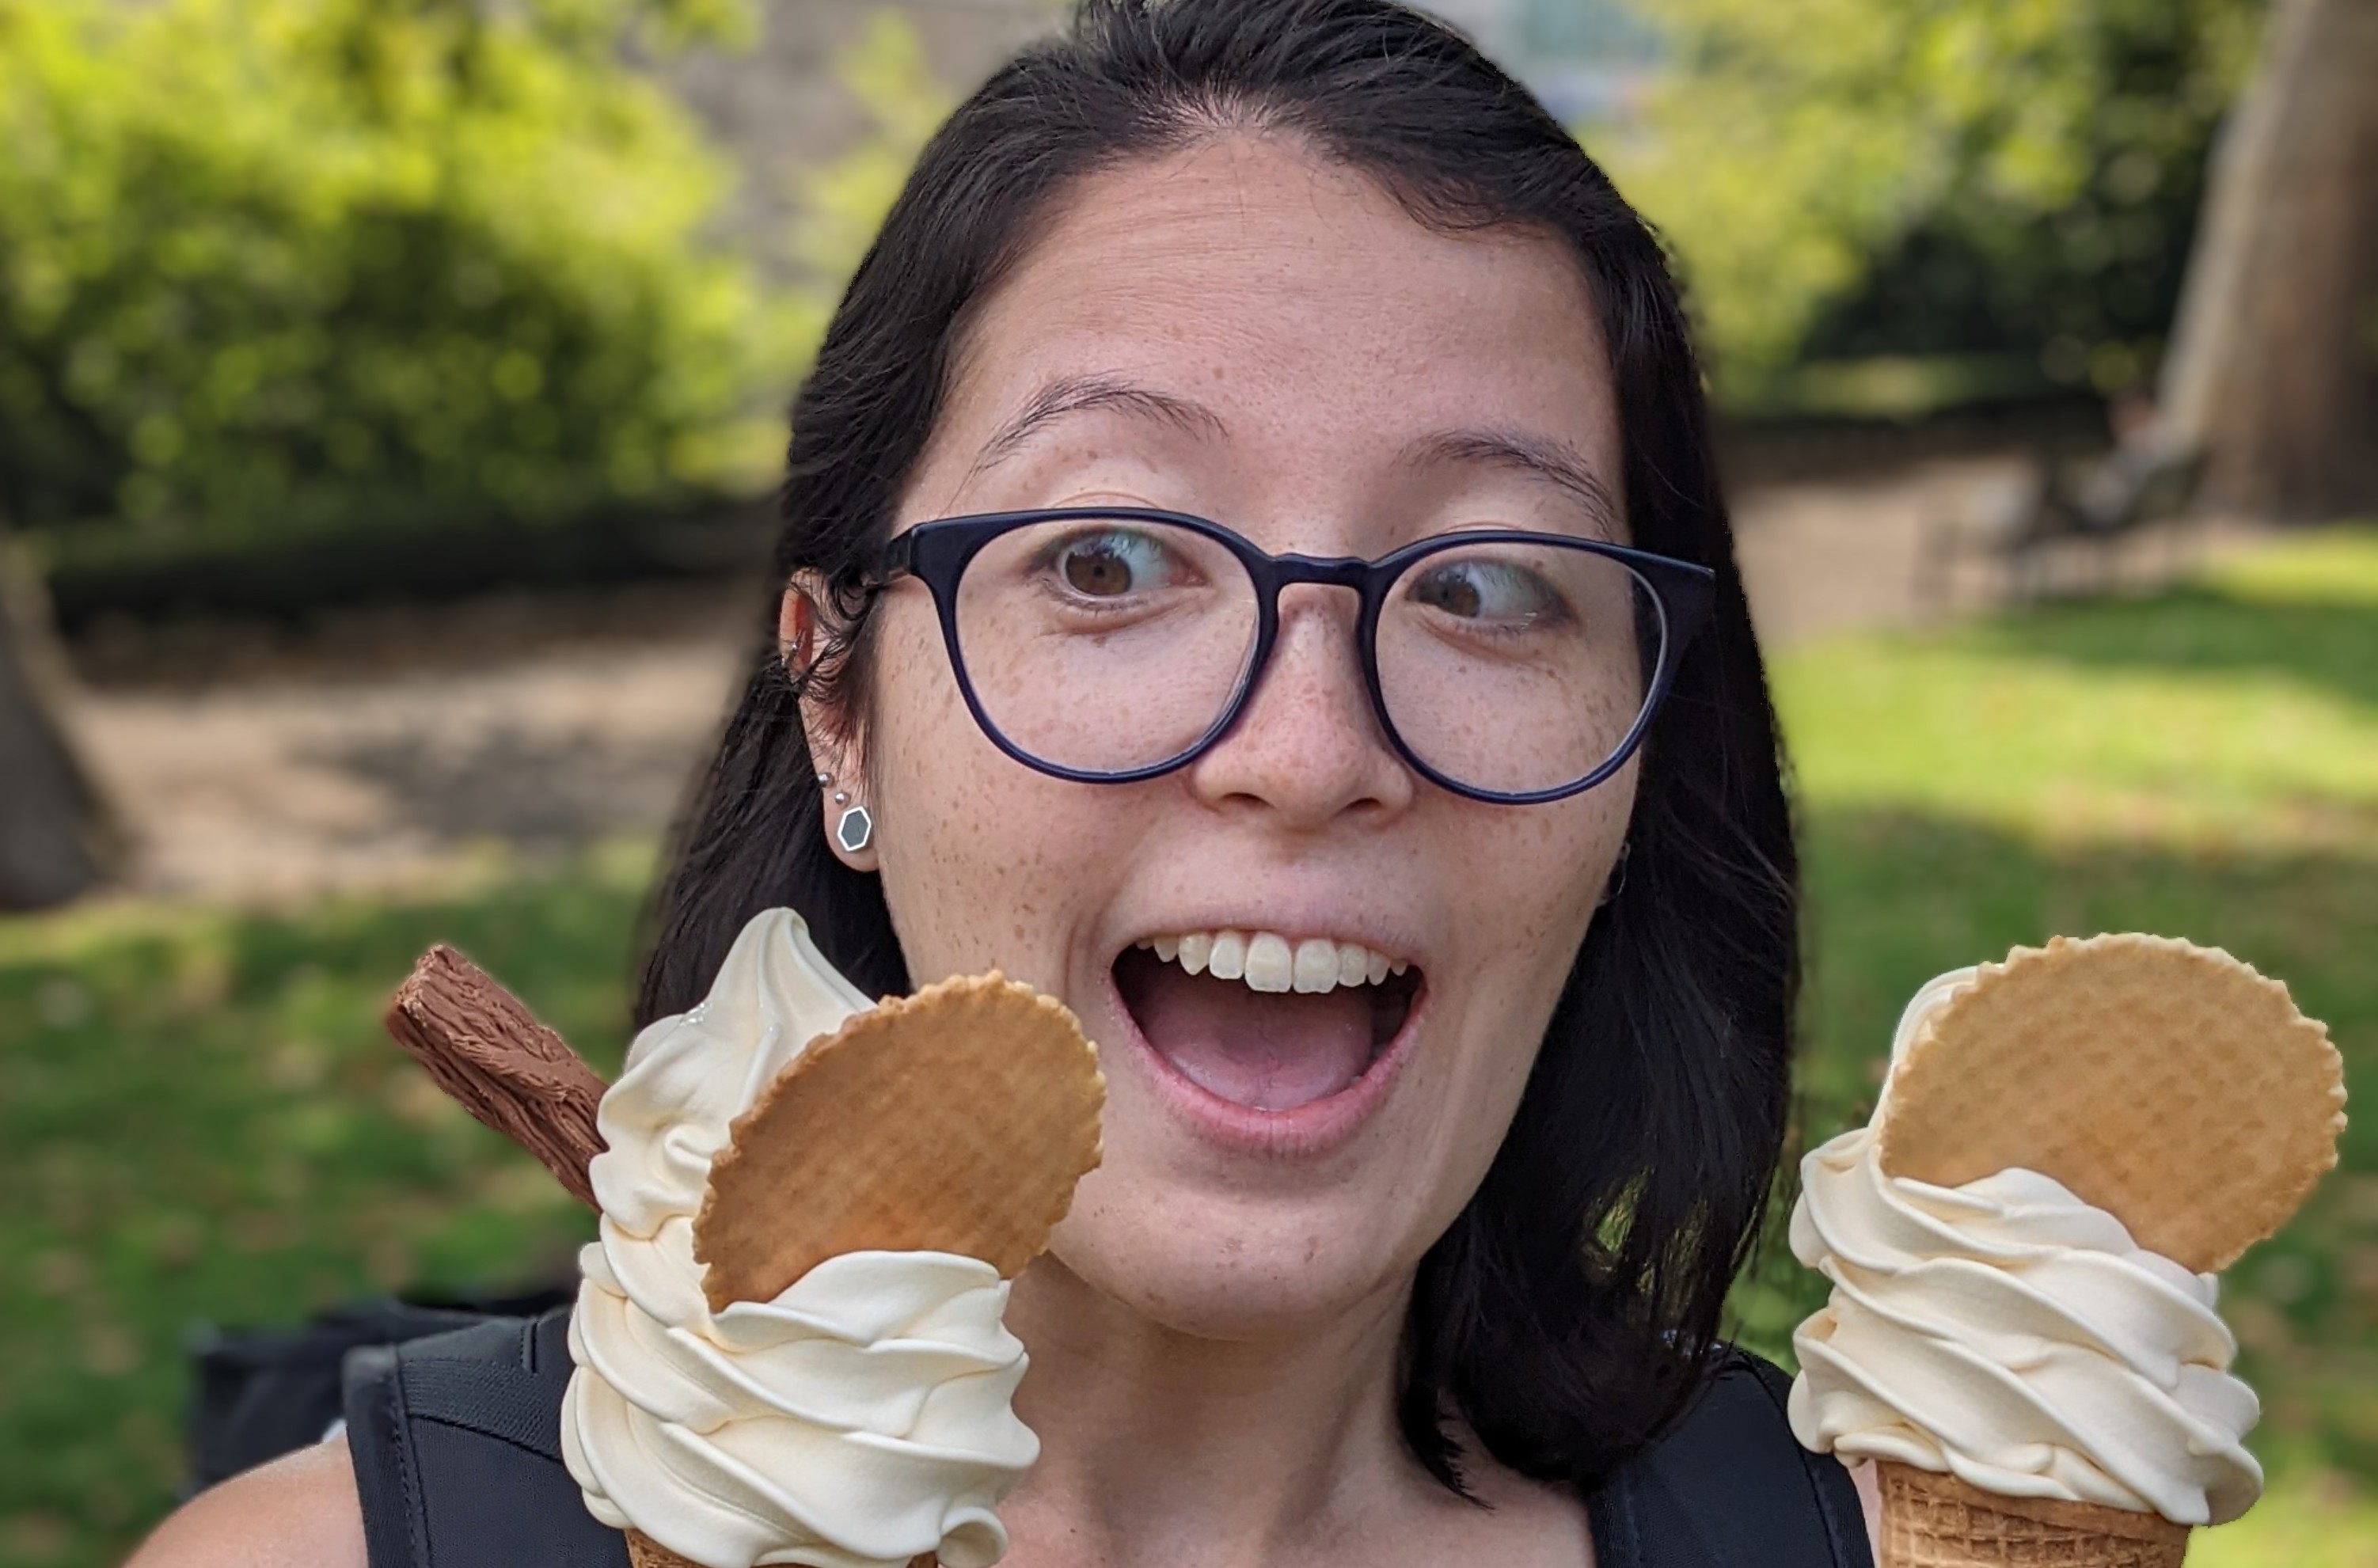 female with short dark brown hair and glasses looking excitedly at an impressive ice cream cone